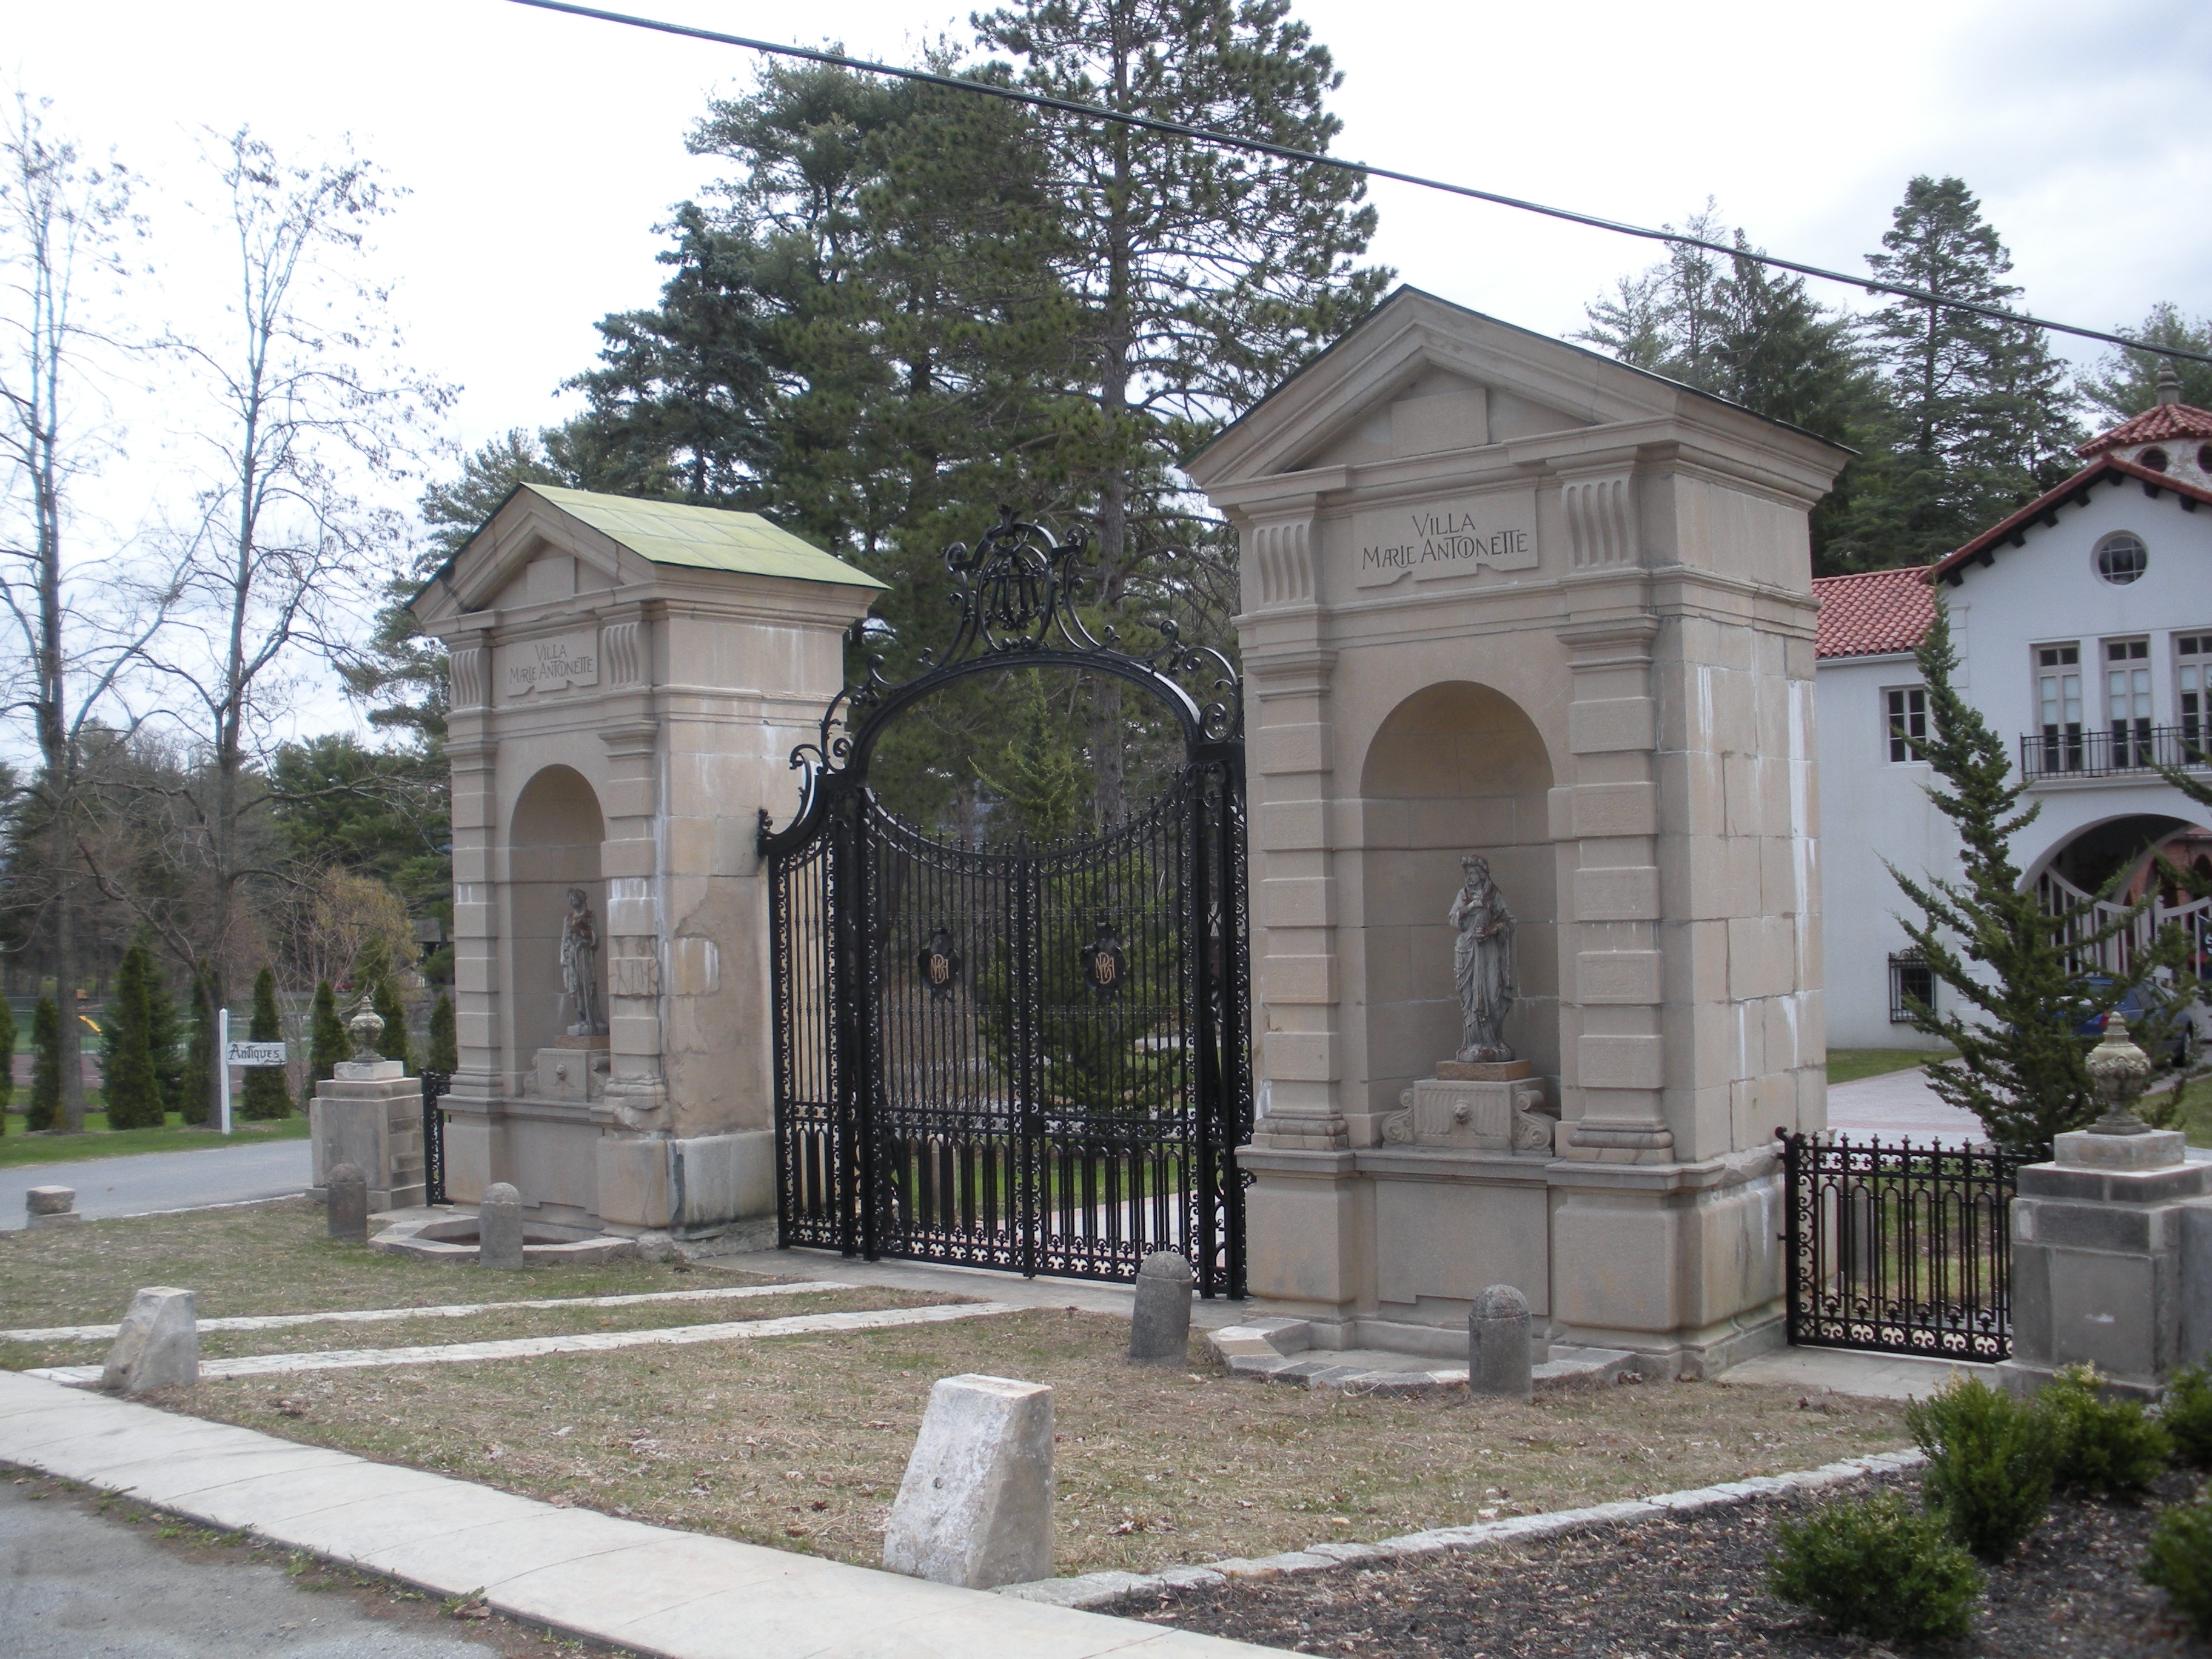 Closer view of gate.